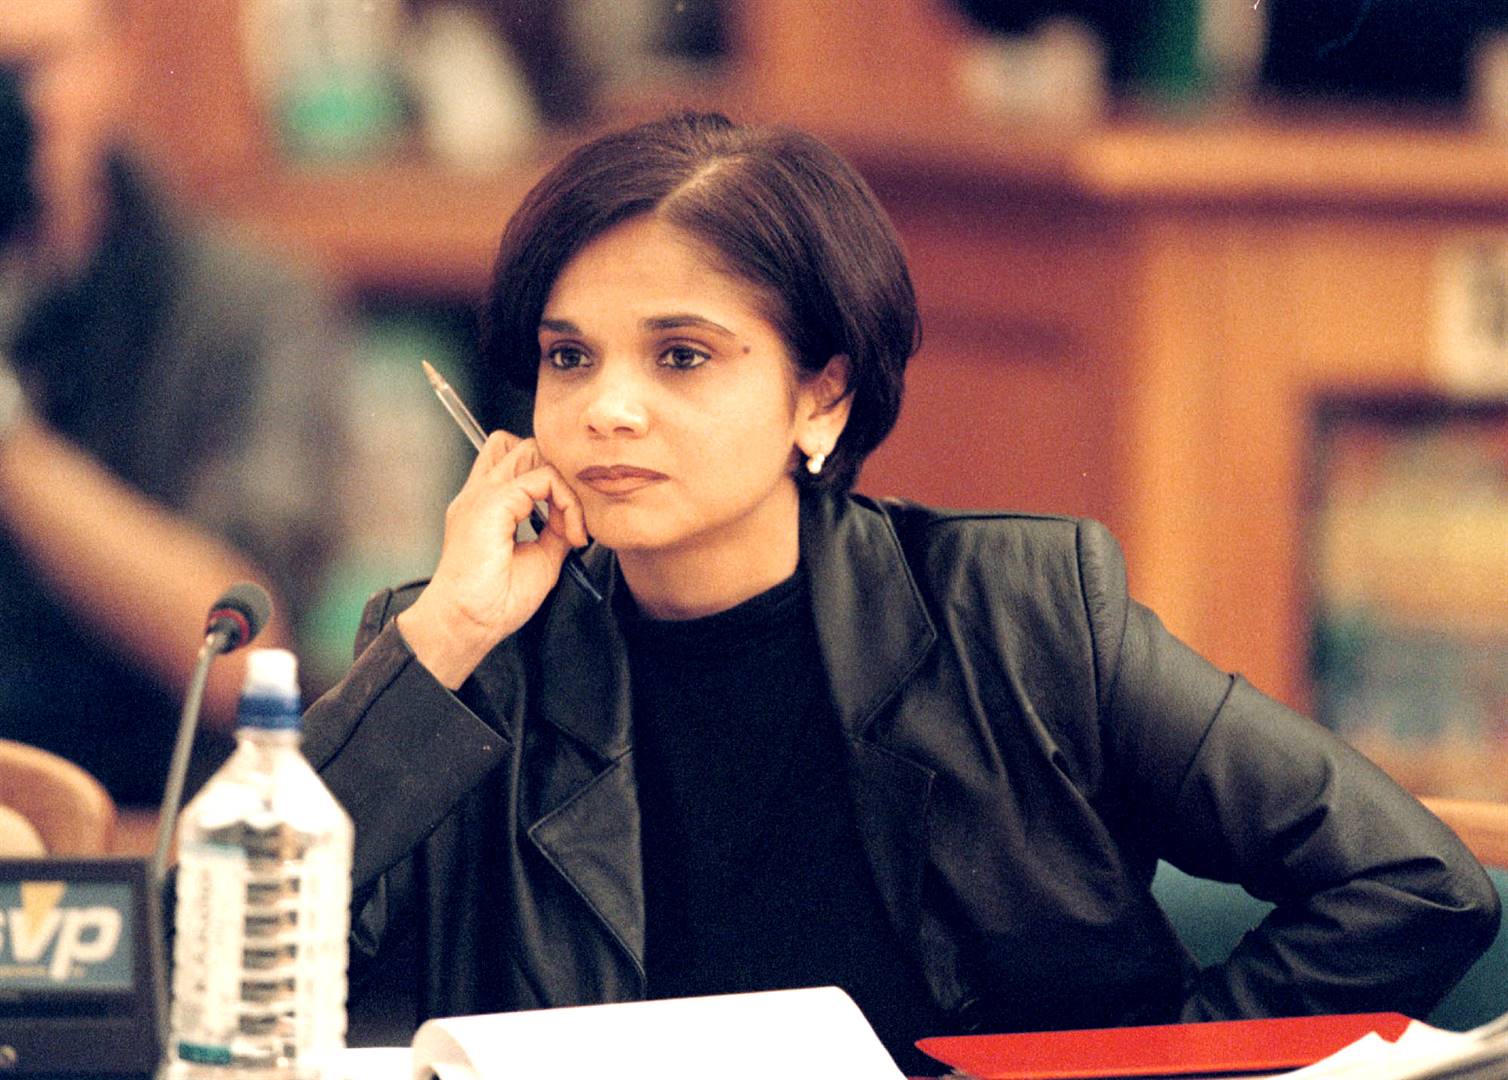 NPA boss Shamila Batohi says prosecutors will continue to do what they have to do in bringing to book students who committed serious crimes during the Fees Must Fall protest.